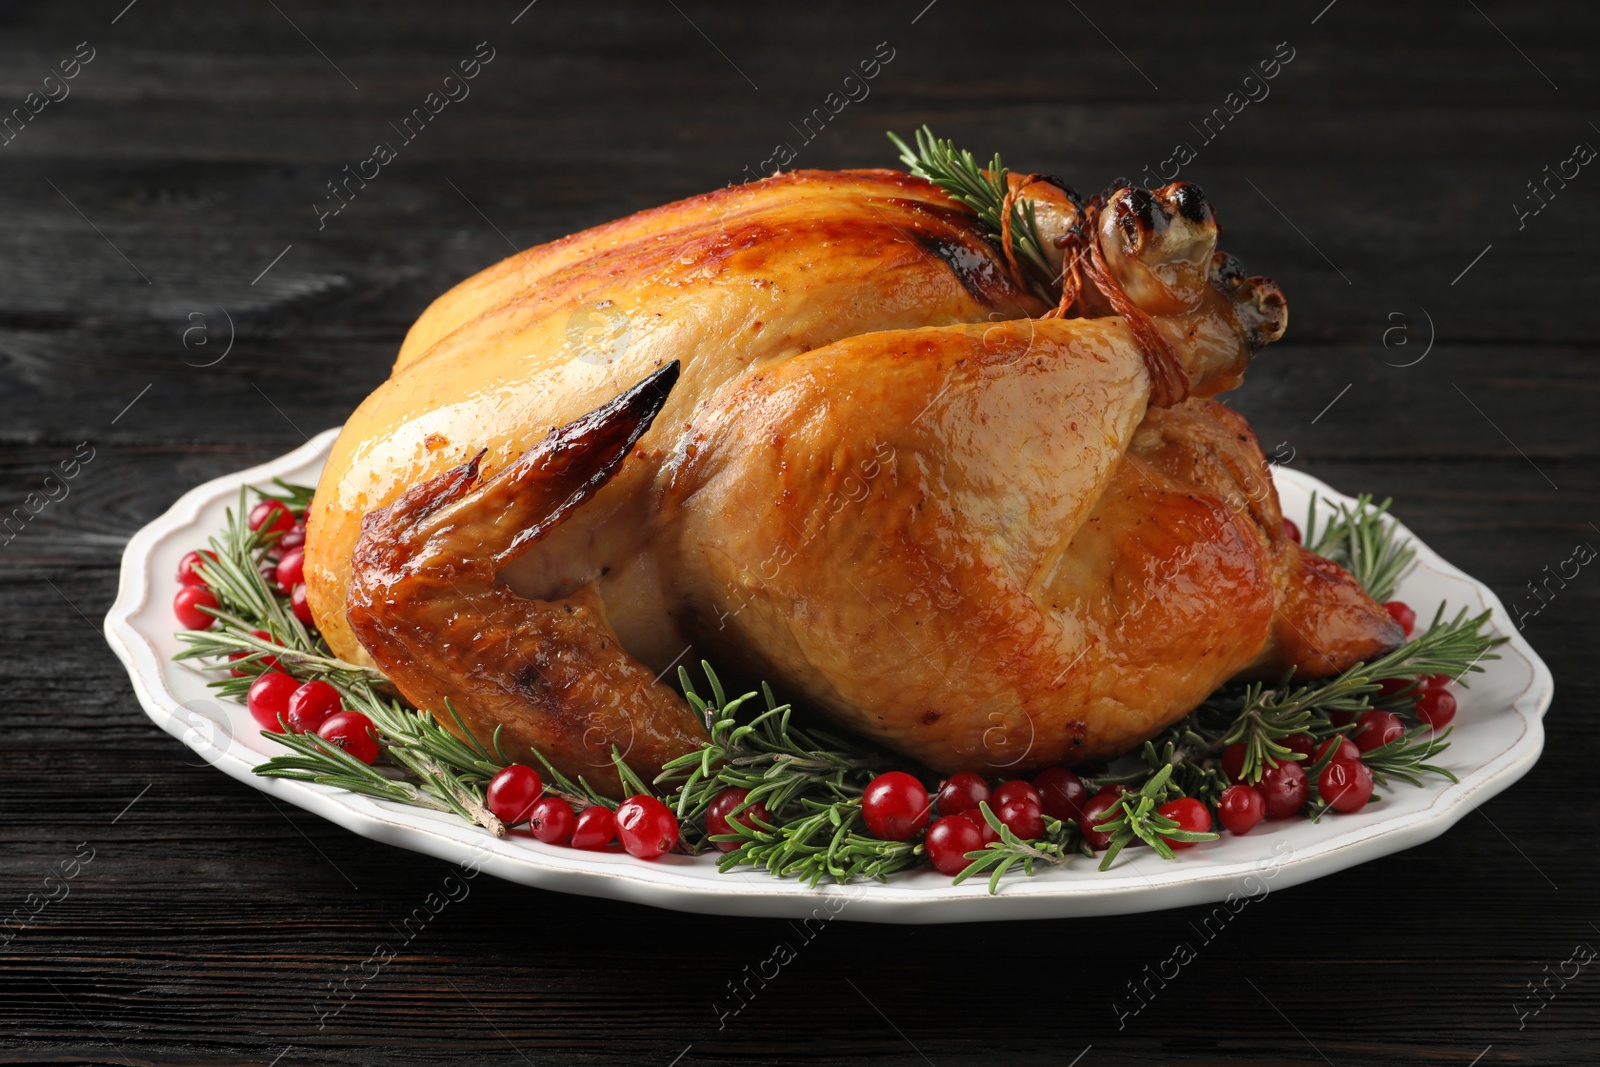 Photo of Platter of cooked turkey with garnish on wooden table